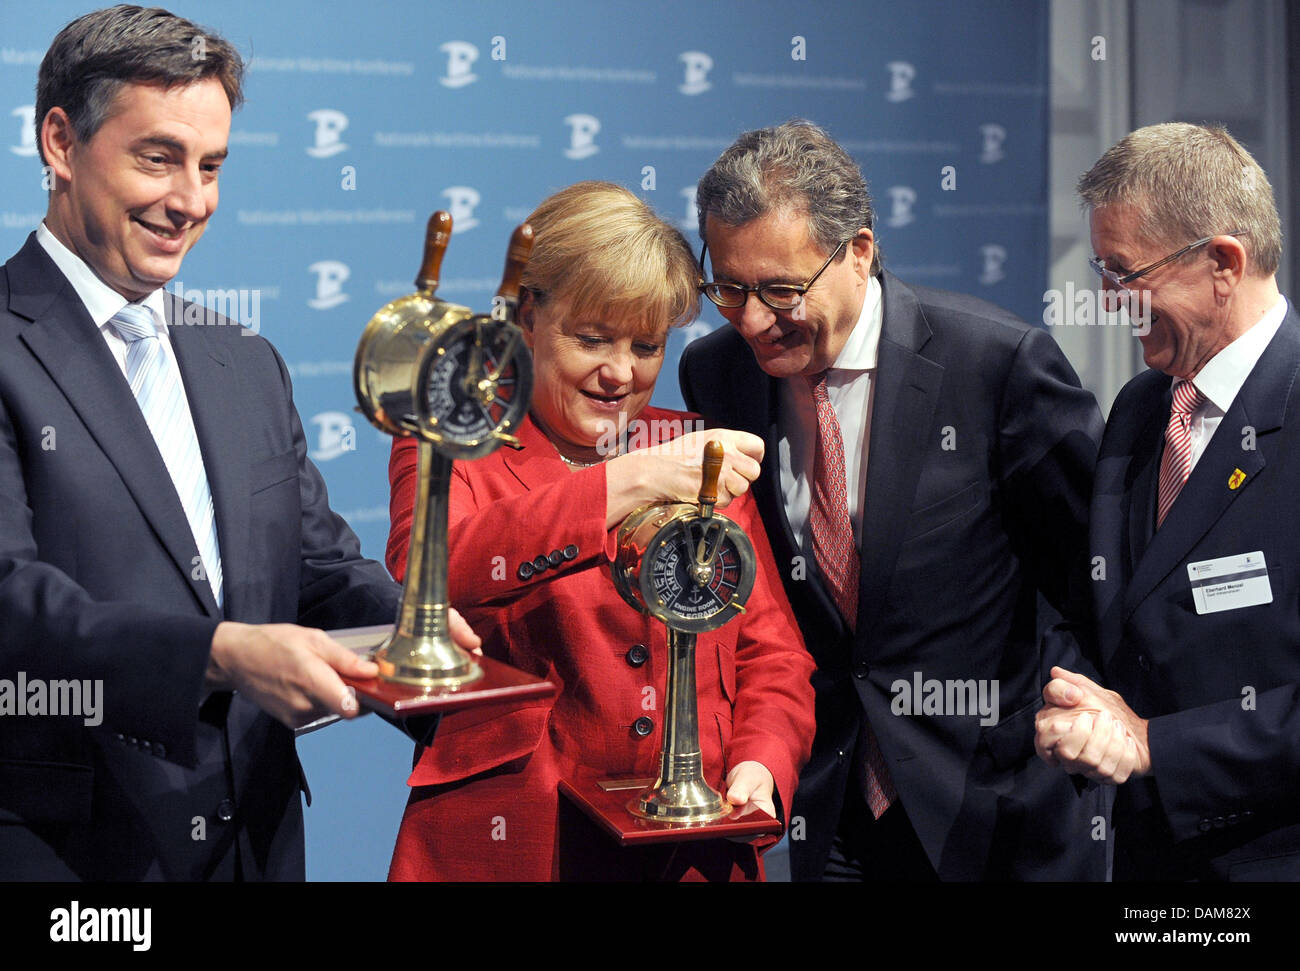 Federal Chancellor Angela Merkel and Lower Saxony's Minister President David McCallister (L-R) recieve engine order telegraphs from Wilhelmshaven's Mayor Eberhard Menzel, while the Parliamentary Secretary at the Federal Ministry of Economics and Government Coordinator for Maritime Economy, Hans-Joachim Otto (R), looks on, at the 7th National Maritime Conference in Wilhelmshaven, Ge Stock Photo